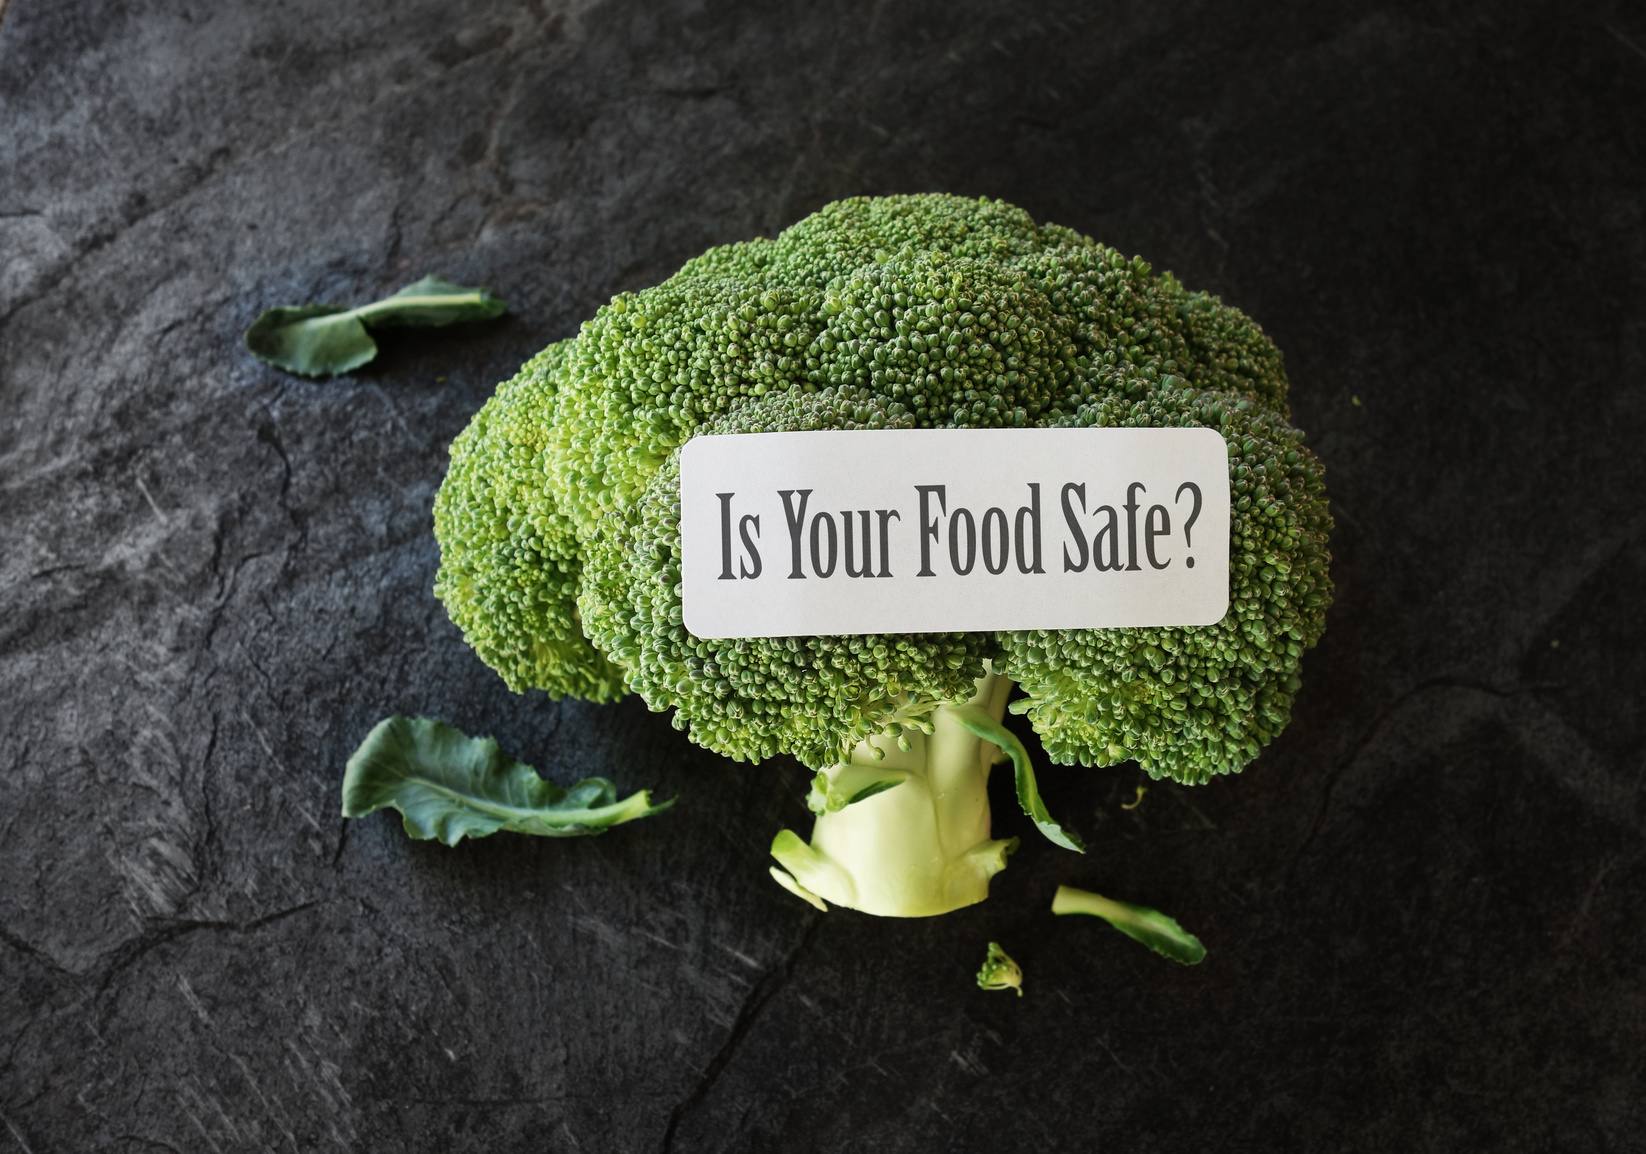 Counterfeit vegetables in Canada? - Canadian Packaging